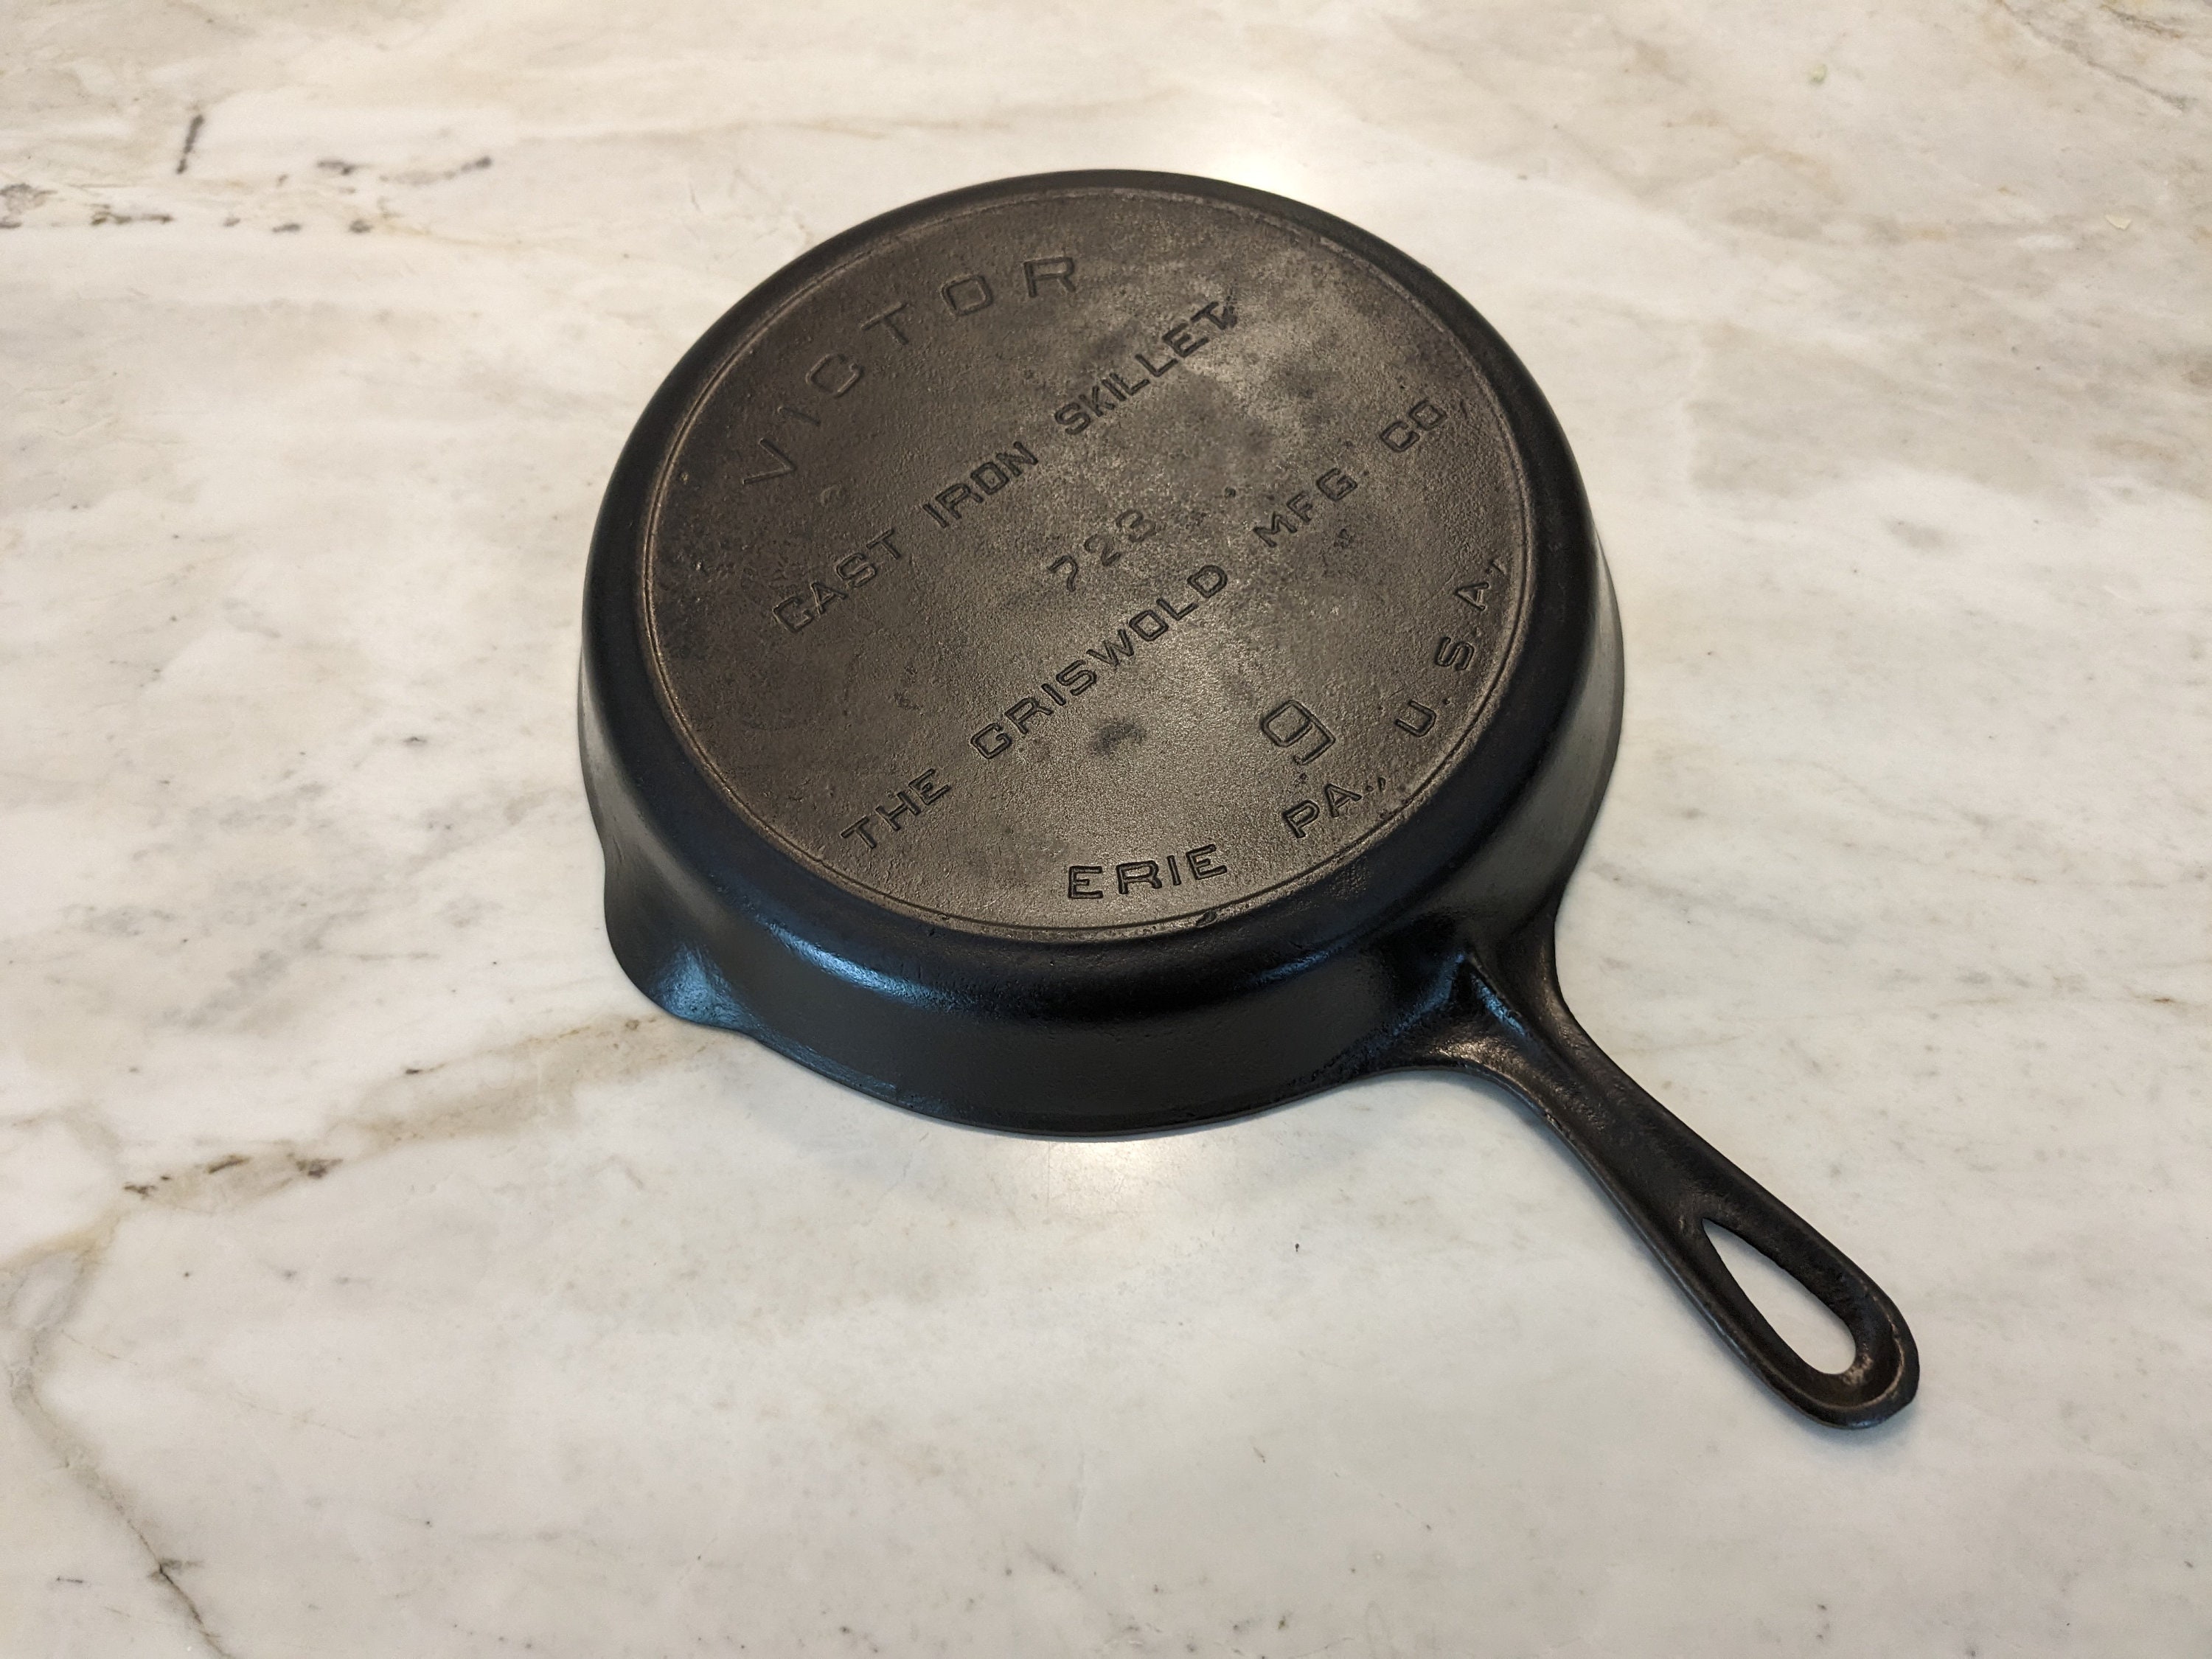 Vintage Victor by Griswold #9 Cast Iron Skillet Fully Marked Erie